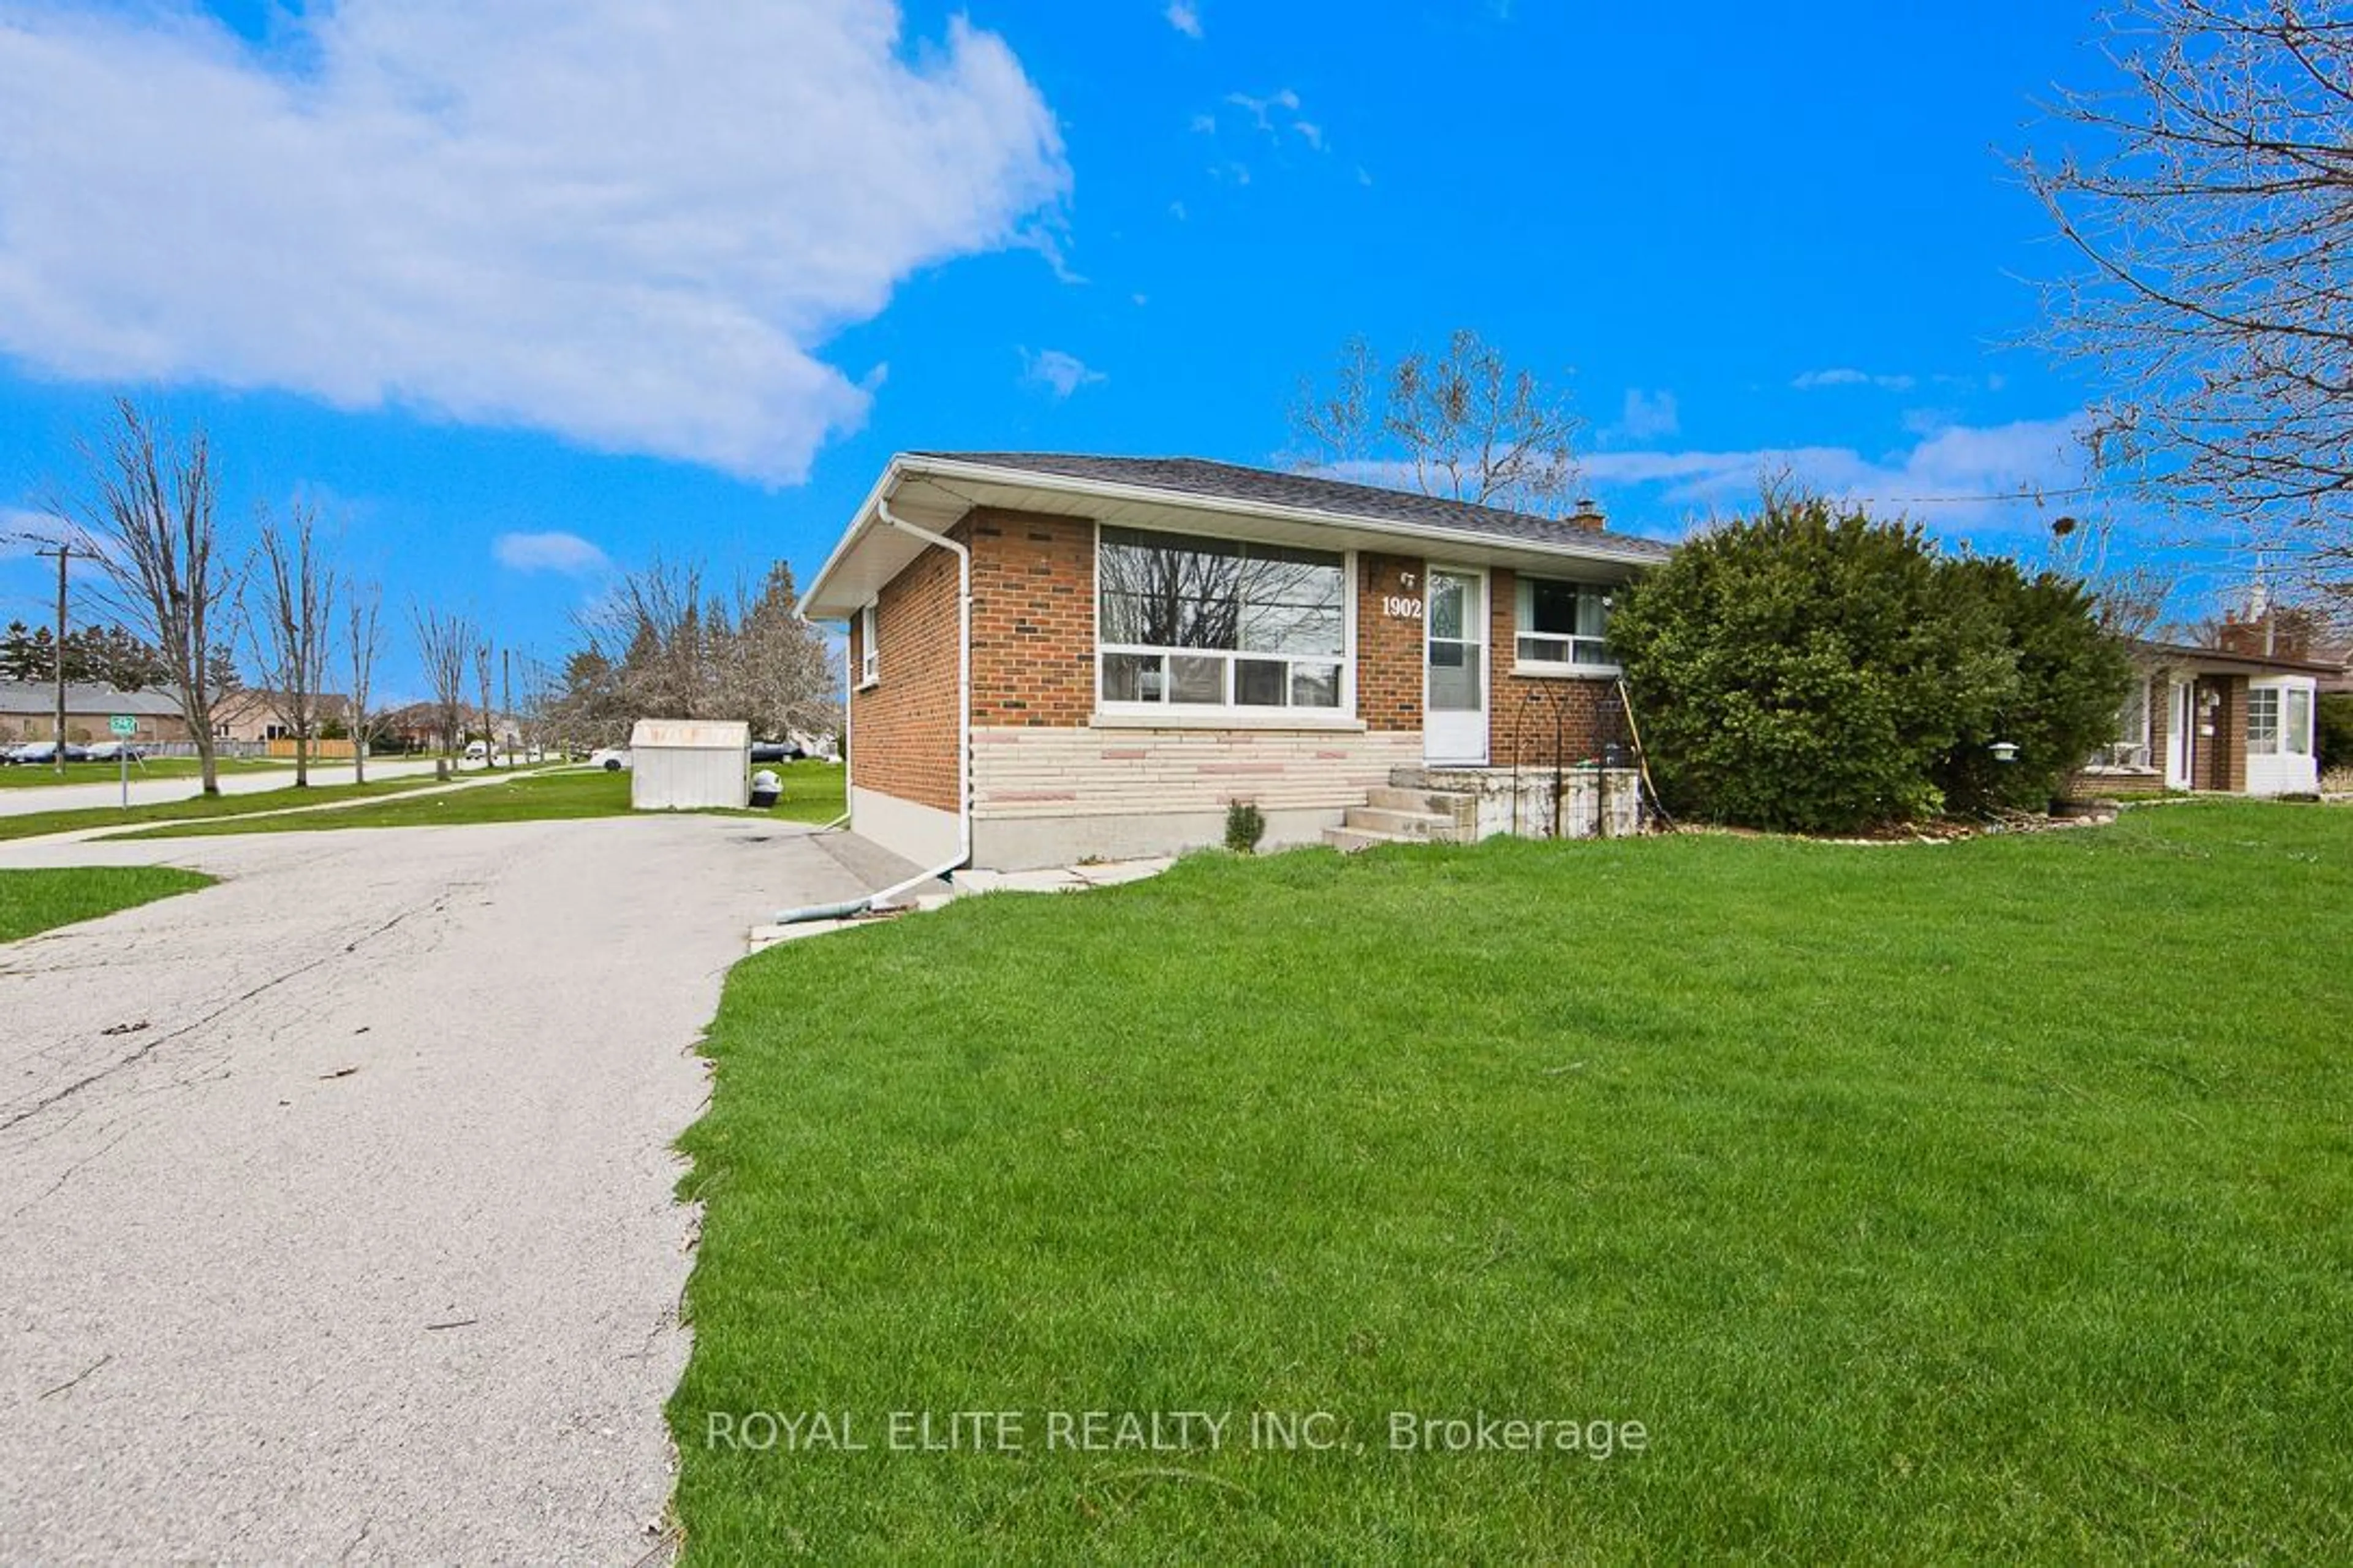 Frontside or backside of a home for 1902 Rossland Rd, Whitby Ontario L1N 3P5